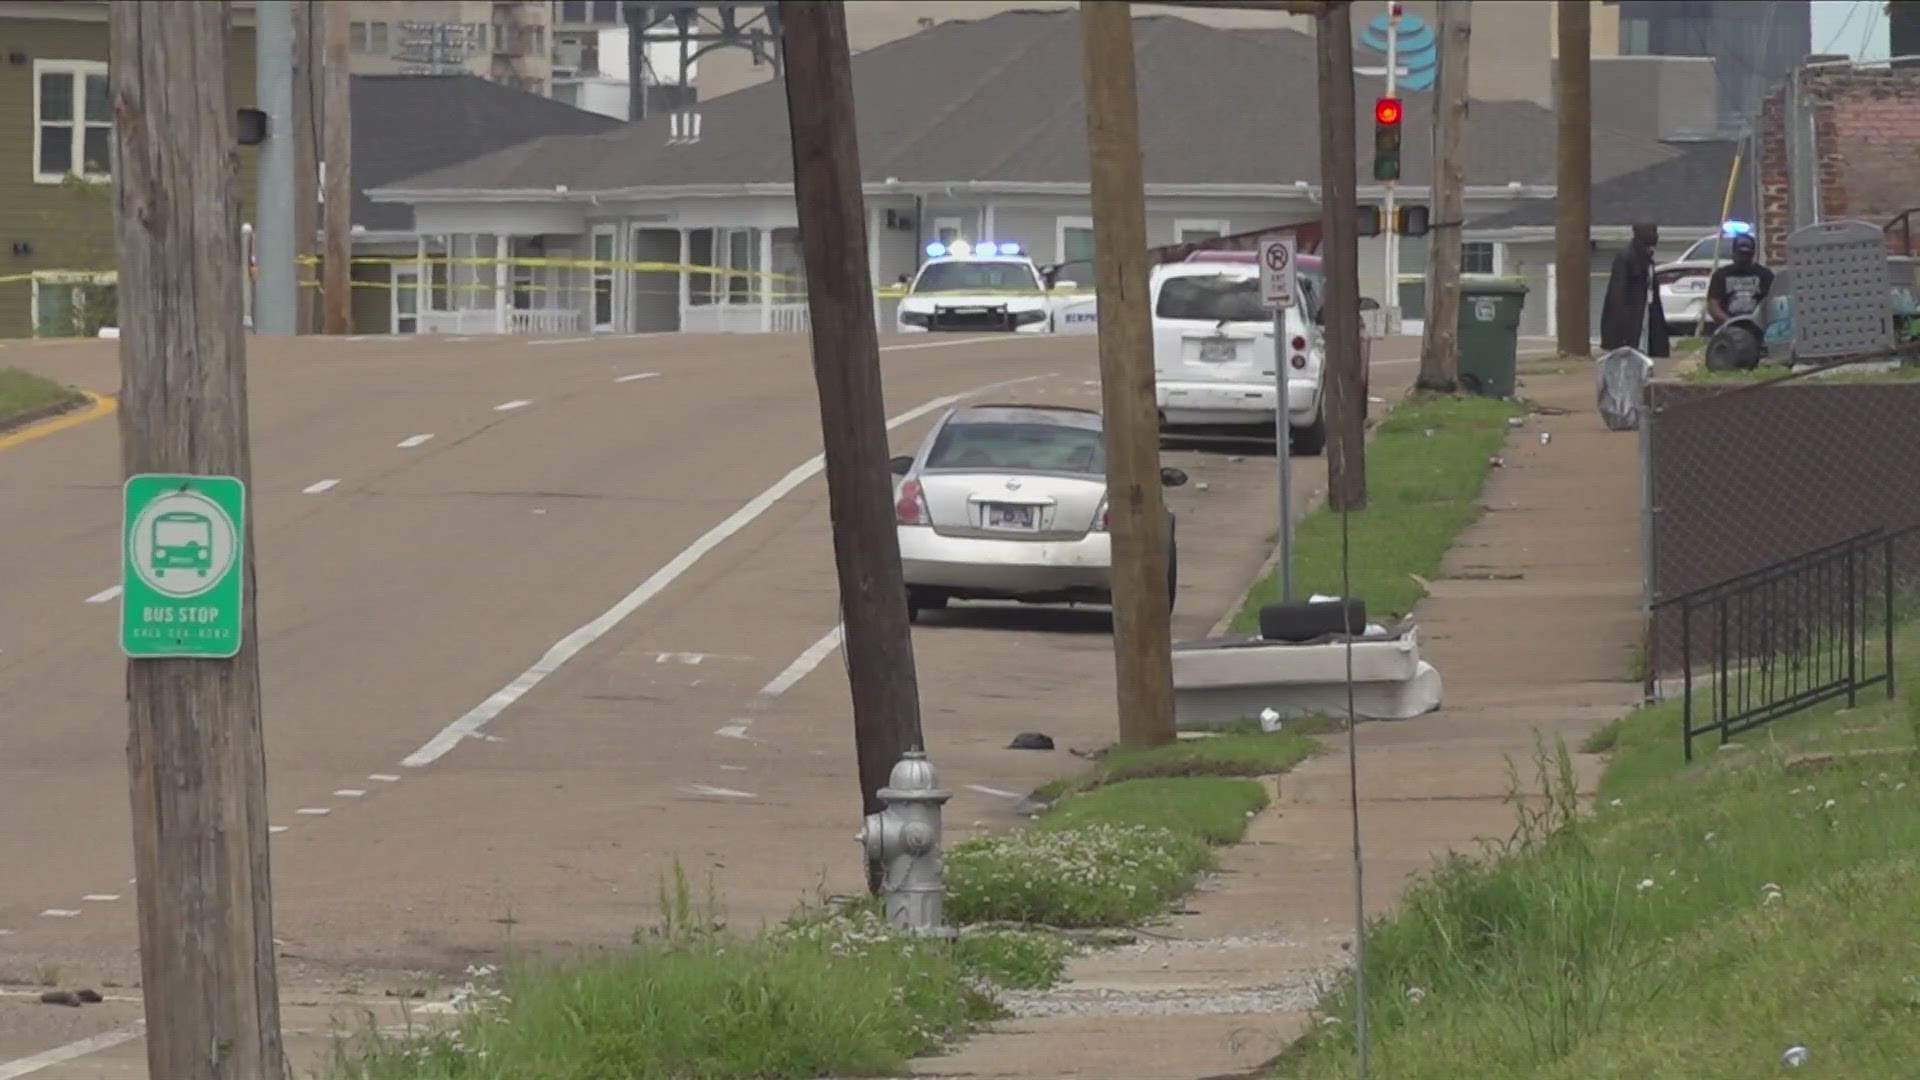 One happened near Danny Thomas Boulevard and Mississippi Boulevard, the other near Crump and Mississippi Boulevard.